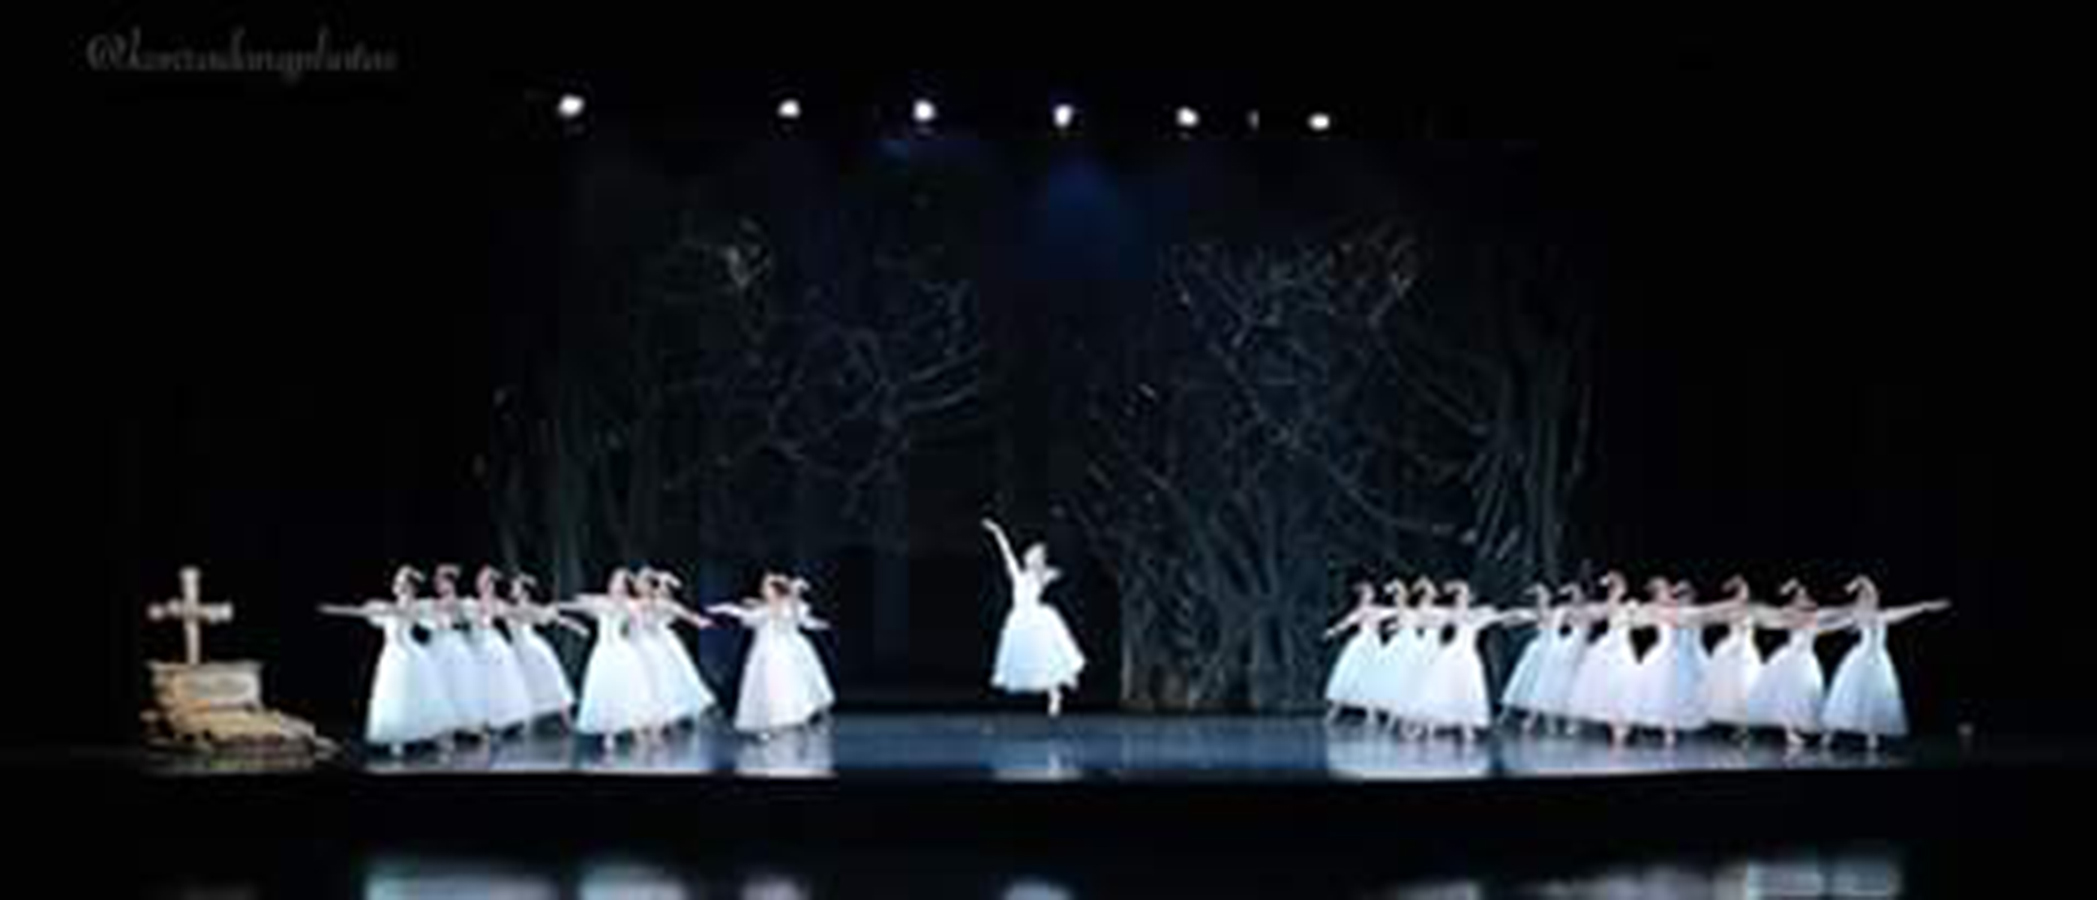 One of the hauntingly beautiful scenes in Giselle that earned sustained audience applause. Photo by Konrad Ong